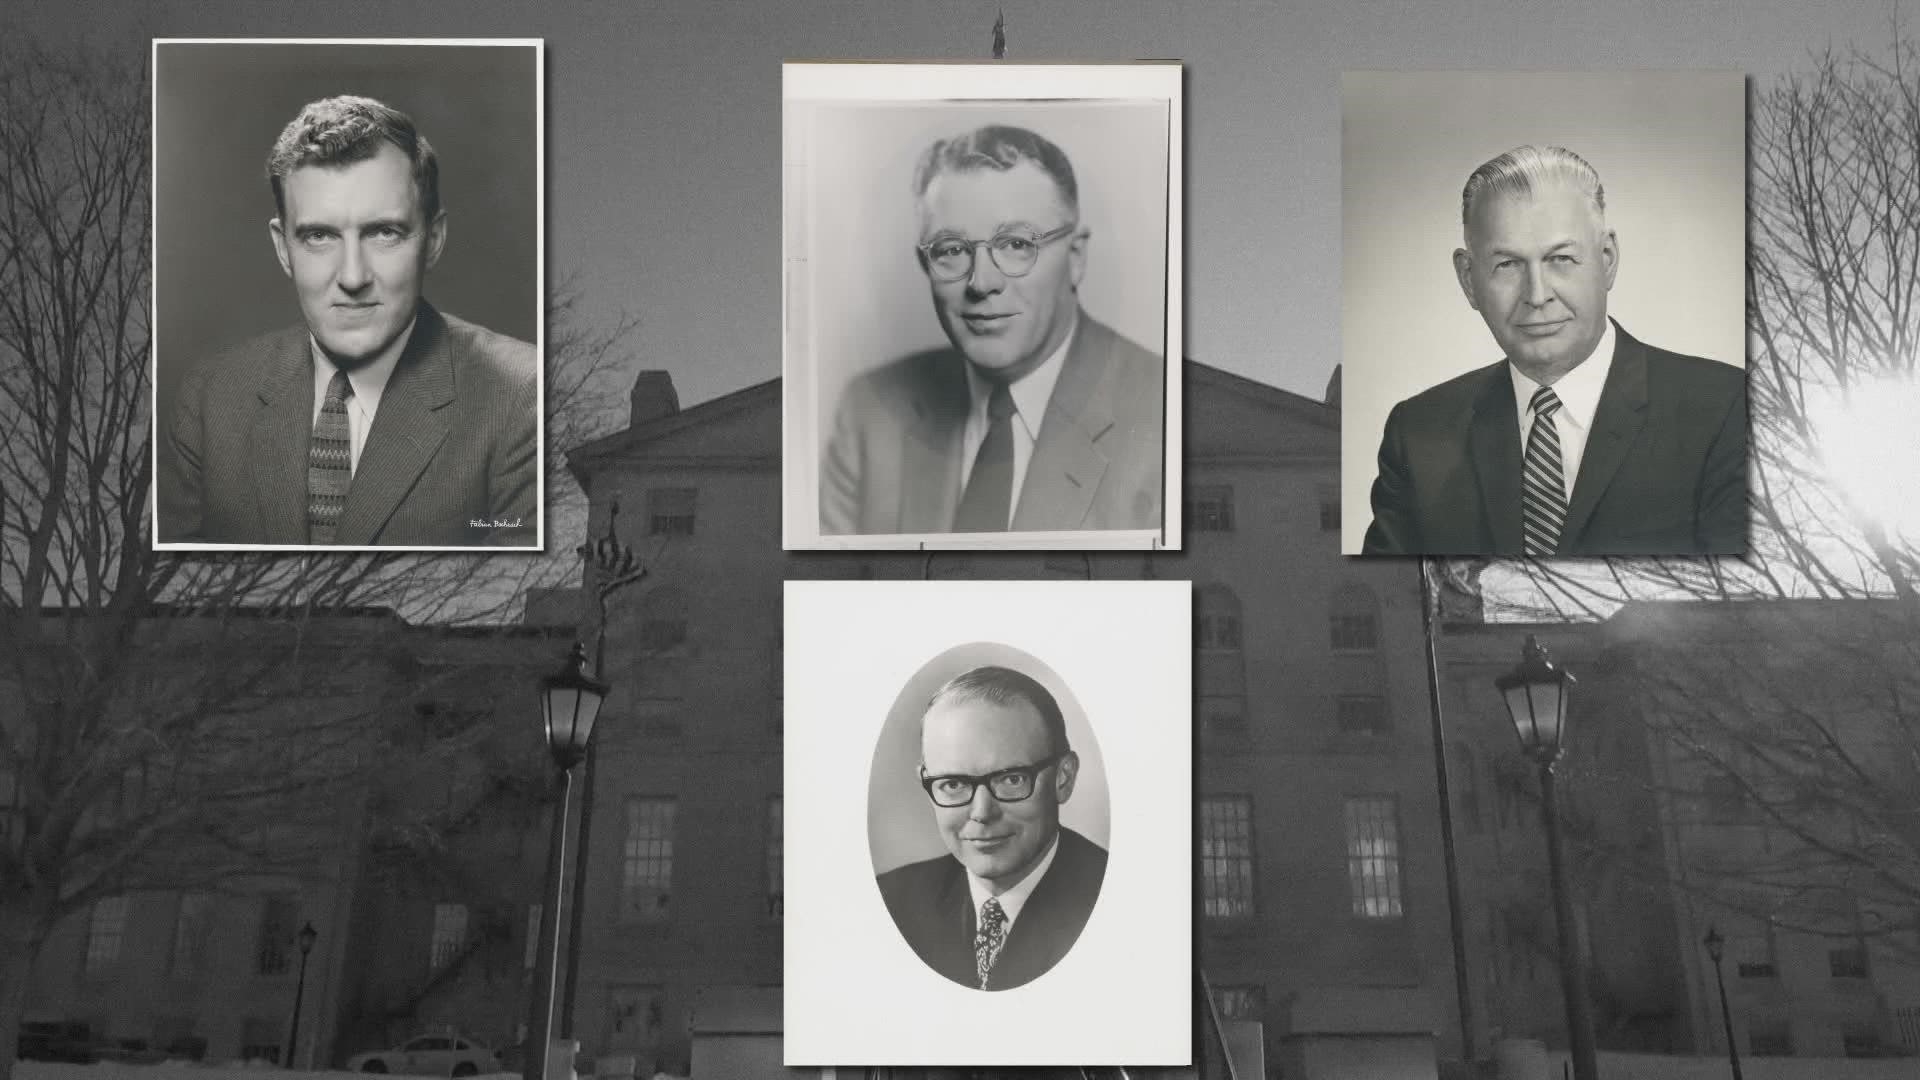 Through tragedy and circumstance, four men occupied the Governor's office in 1959.